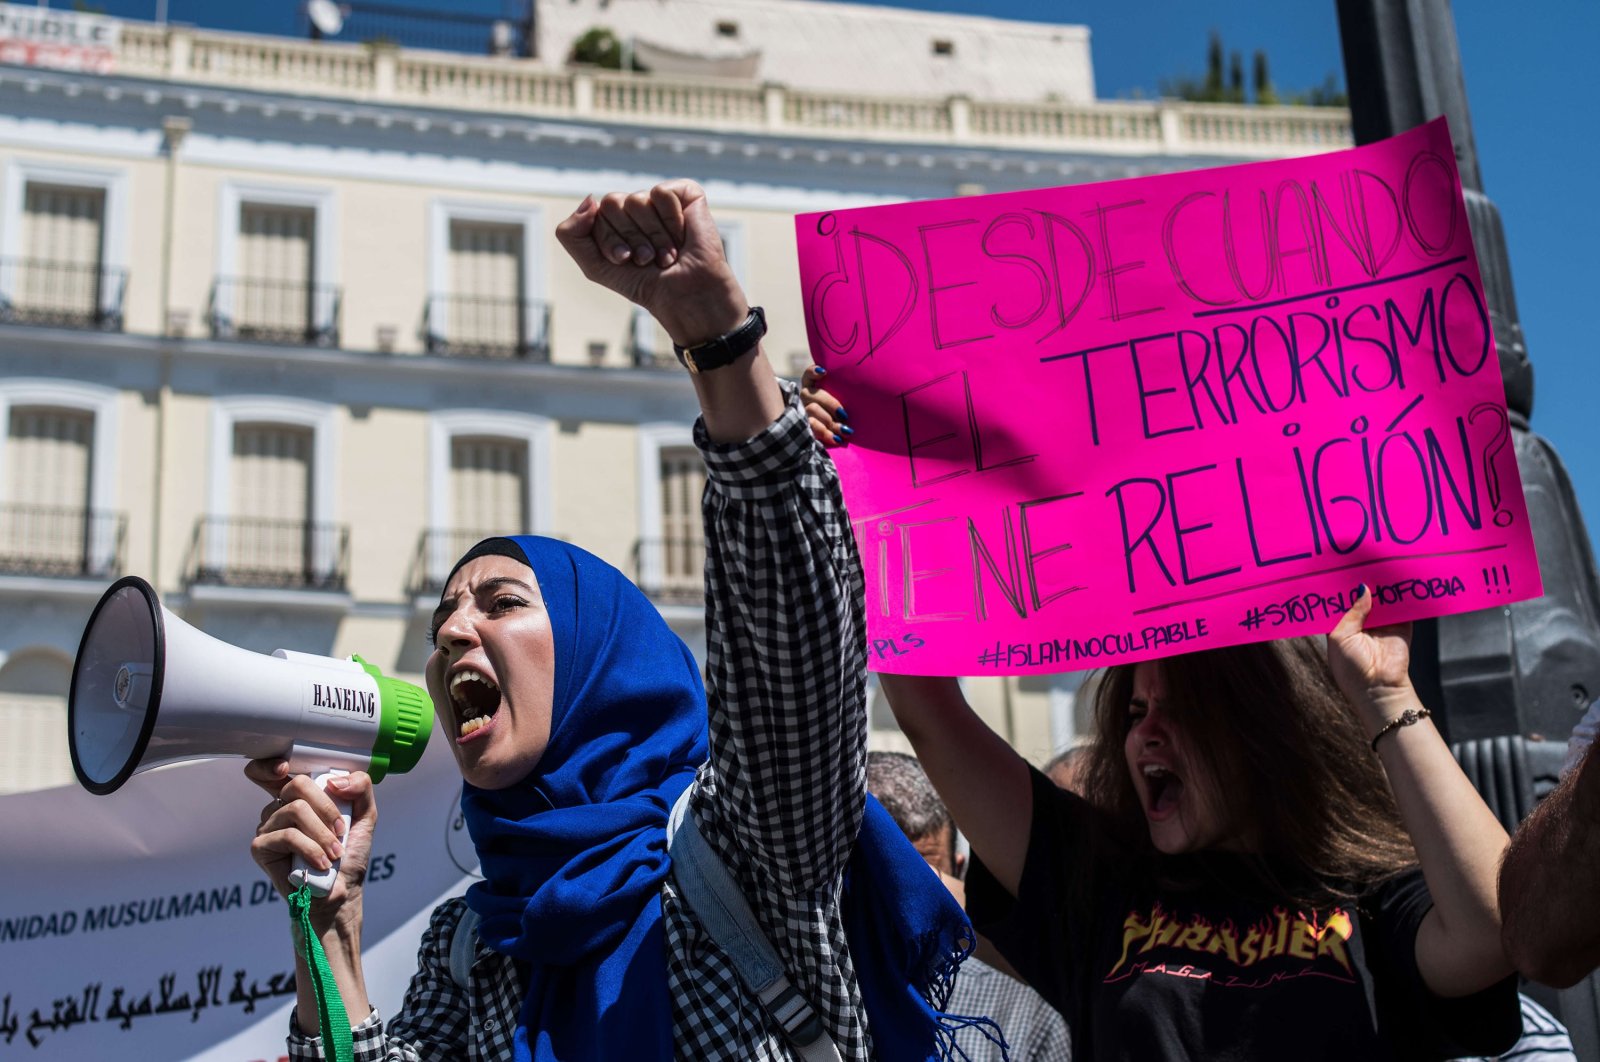 A woman uses a loudspeaker to call out slogans against terrorism with a placard in the background reading "Since when does terrorism have religion?" The Muslim community of Madrid gathered to reject terrorist attacks in Barcelona under the slogan "Not in my name," Madrid, Spain, Aug. 20, 2017. (Photo by Marcos del Mazo/LightRocket via Getty Images)